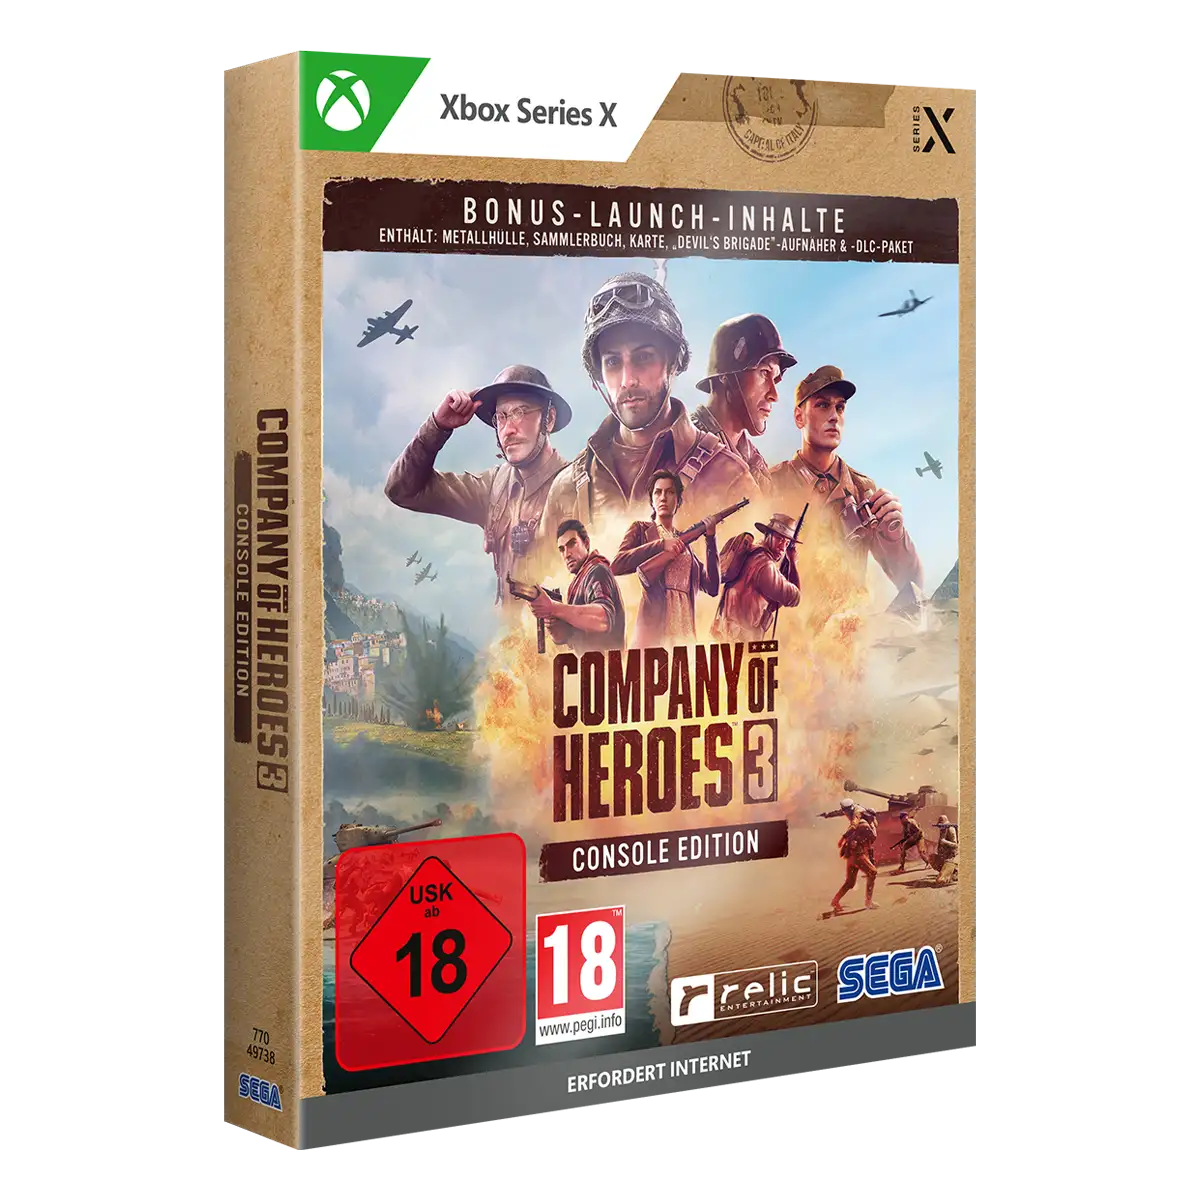 Company of Heroes 3 Launch Edition (Metal Case) (Xbox Series X) Image 2